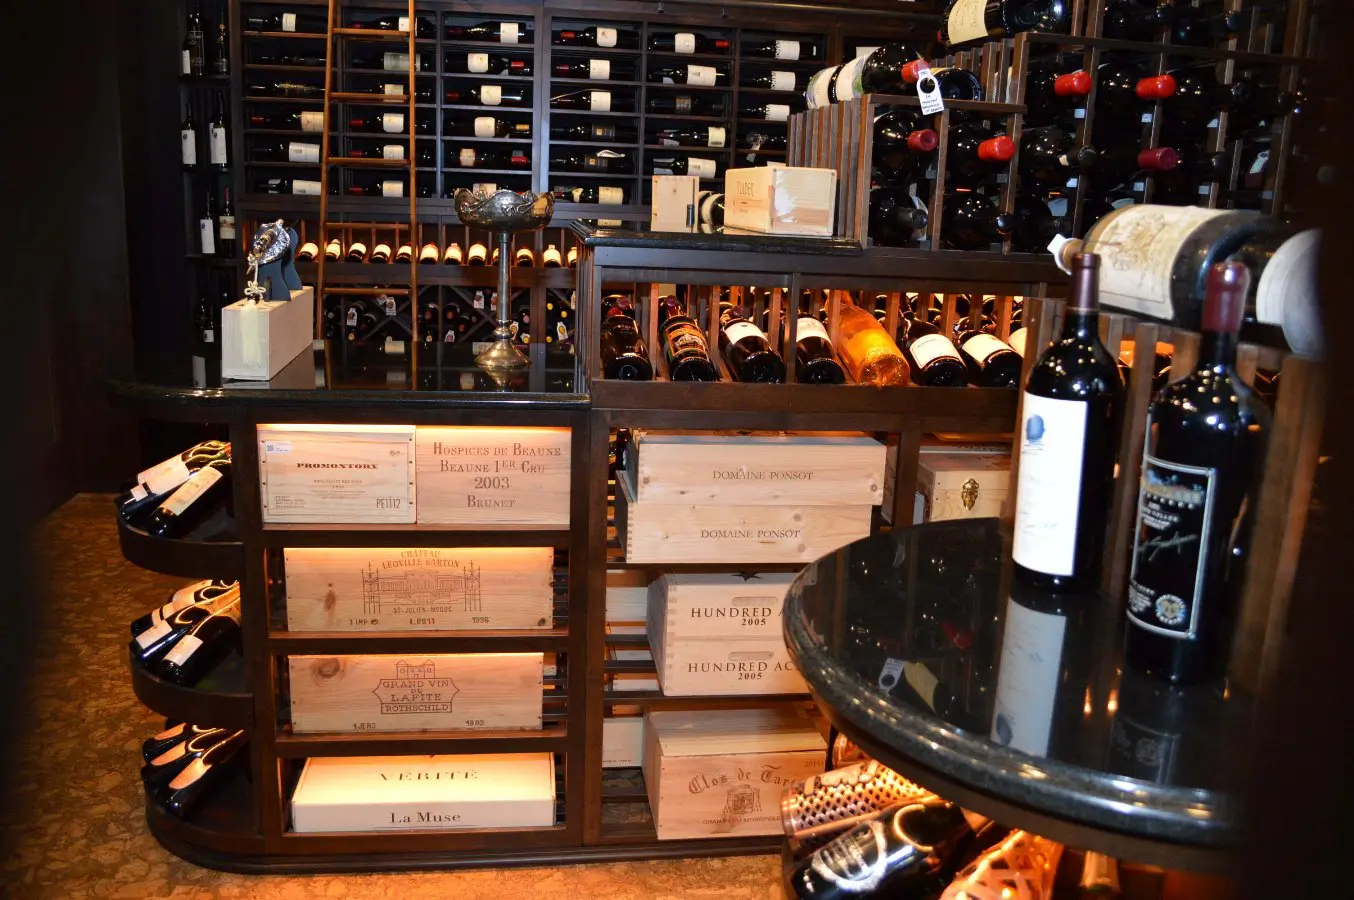 Wooden Case Bins for Bulk Storage: a Custom Feature in this Home Wine Cellar Installed in Florida